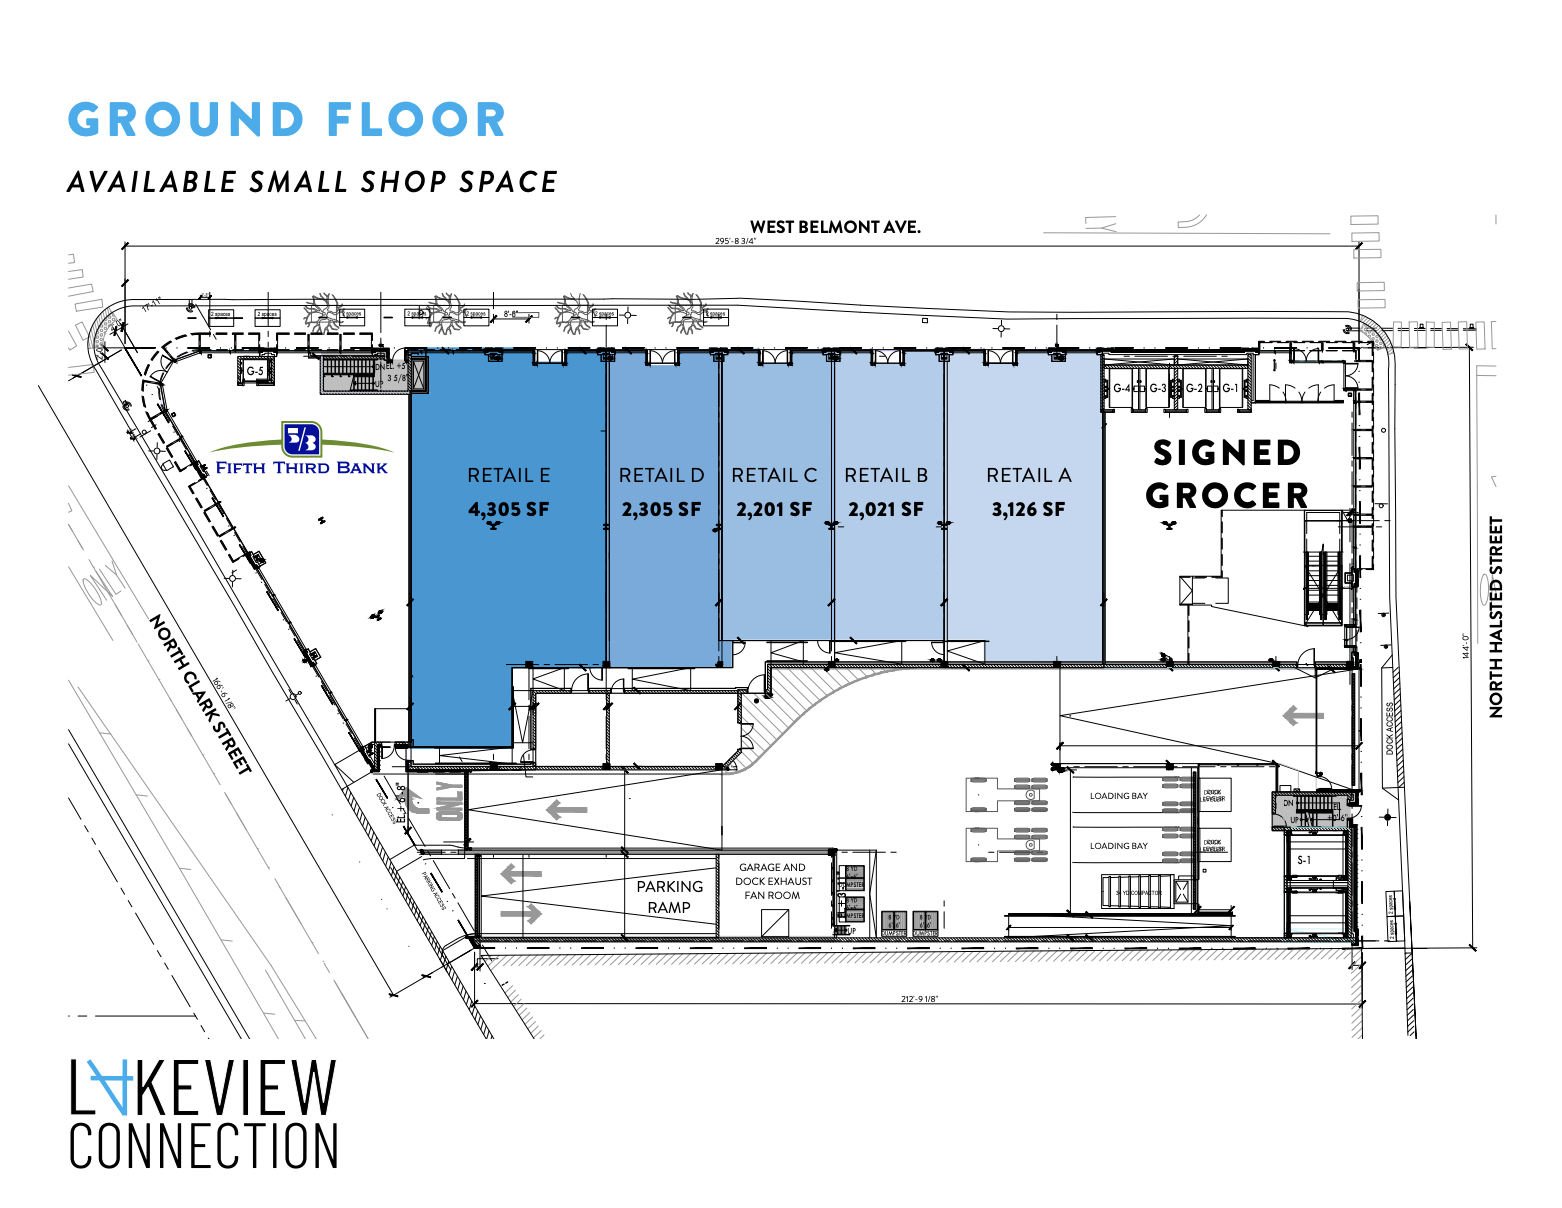 Lakeview Connection first floor plan via CBRE / Hubbard Street Group